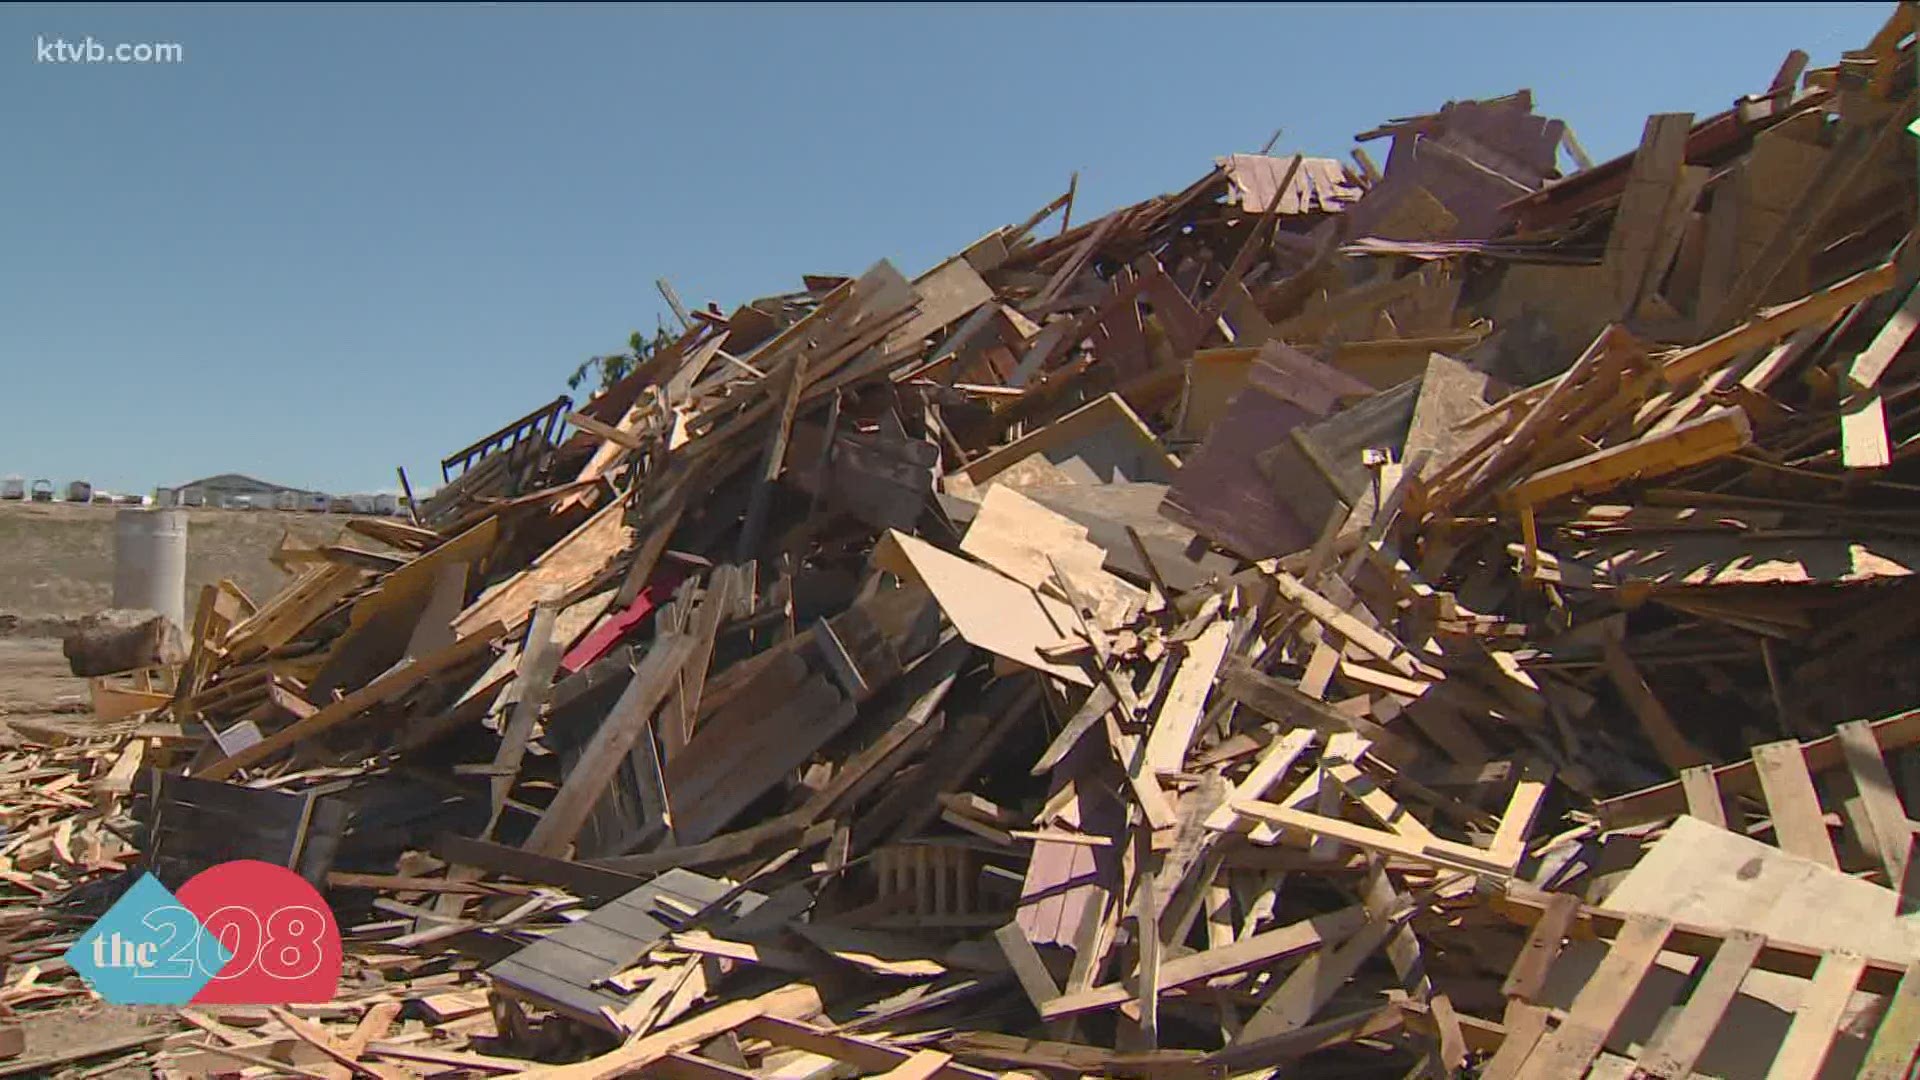 One Boise recycling company is the best of the growth and turning the increased amount of yard and construction waste into usable products.